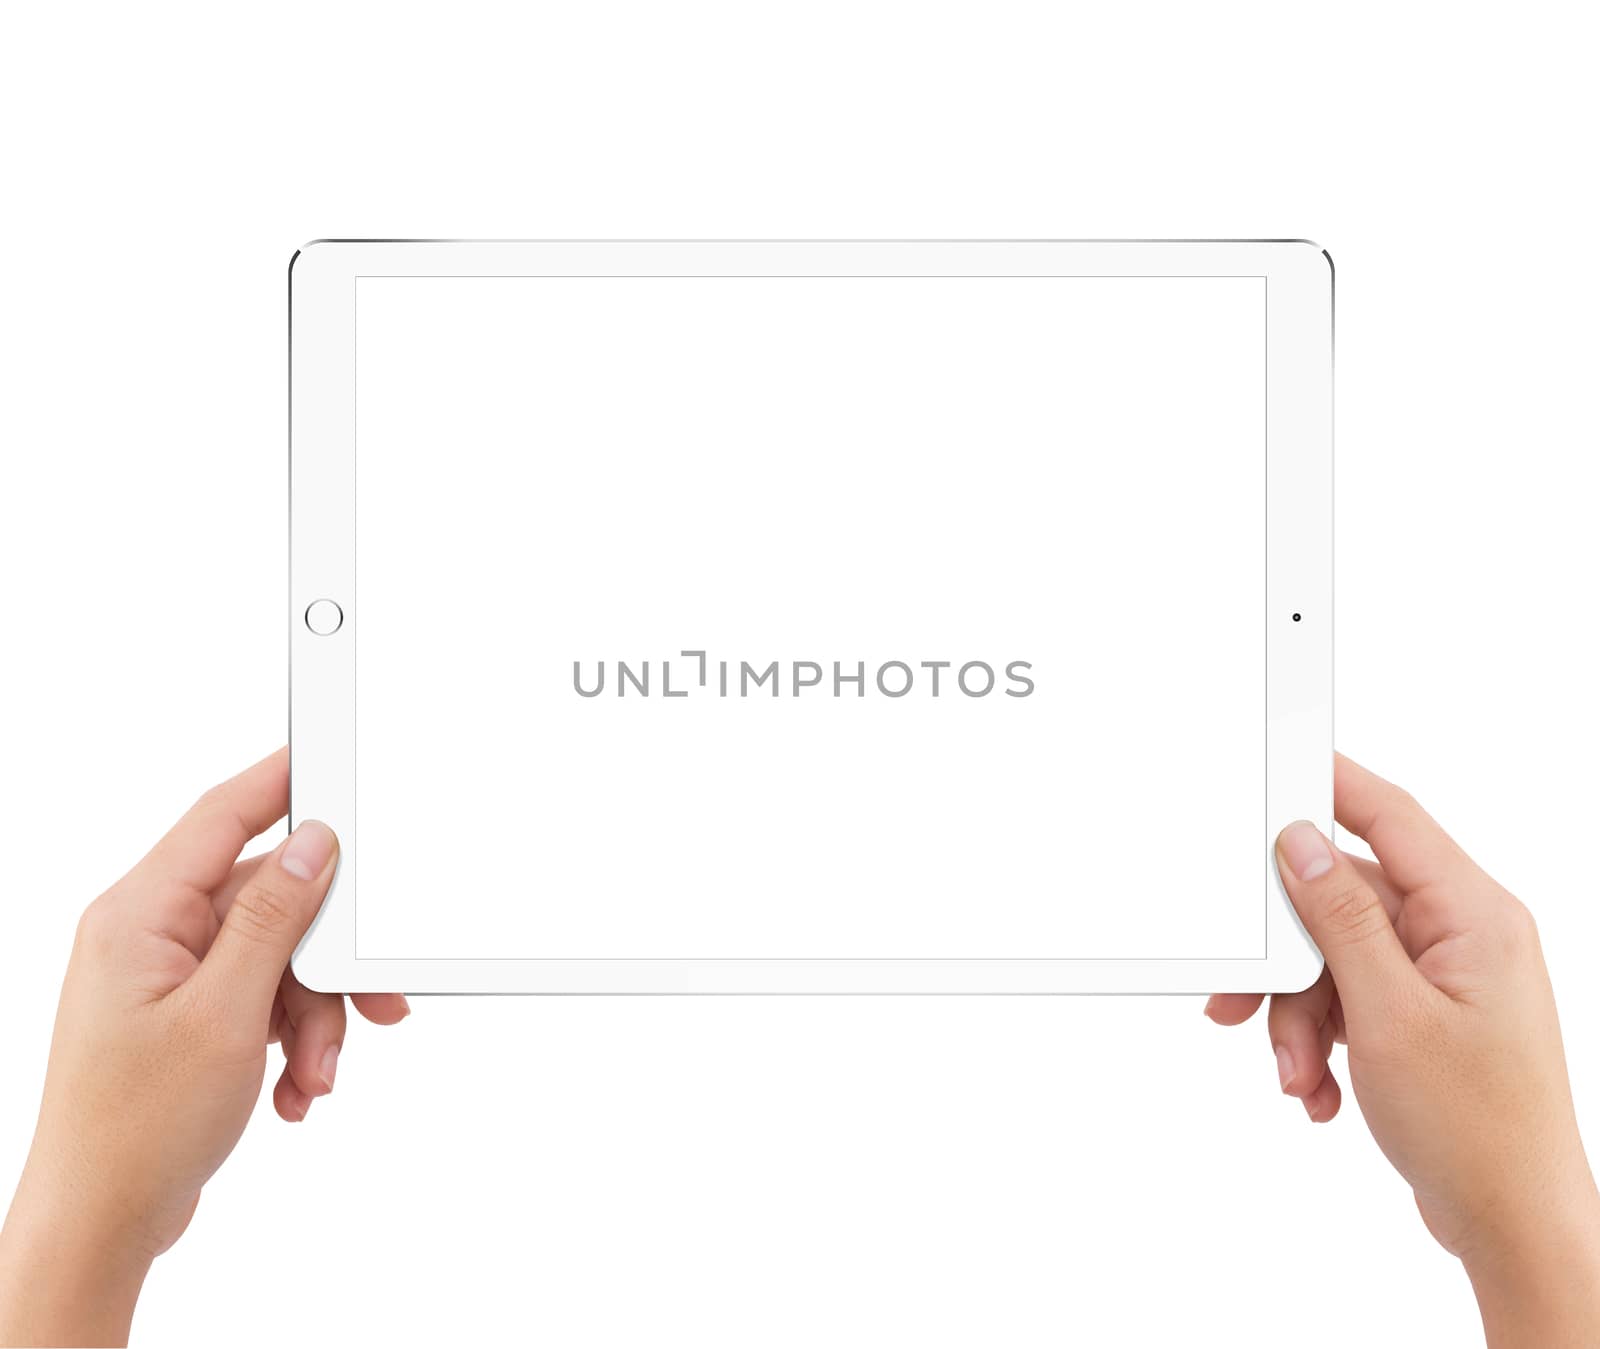 Isolated human two hands holding white tablet computer white screen mockup on white background